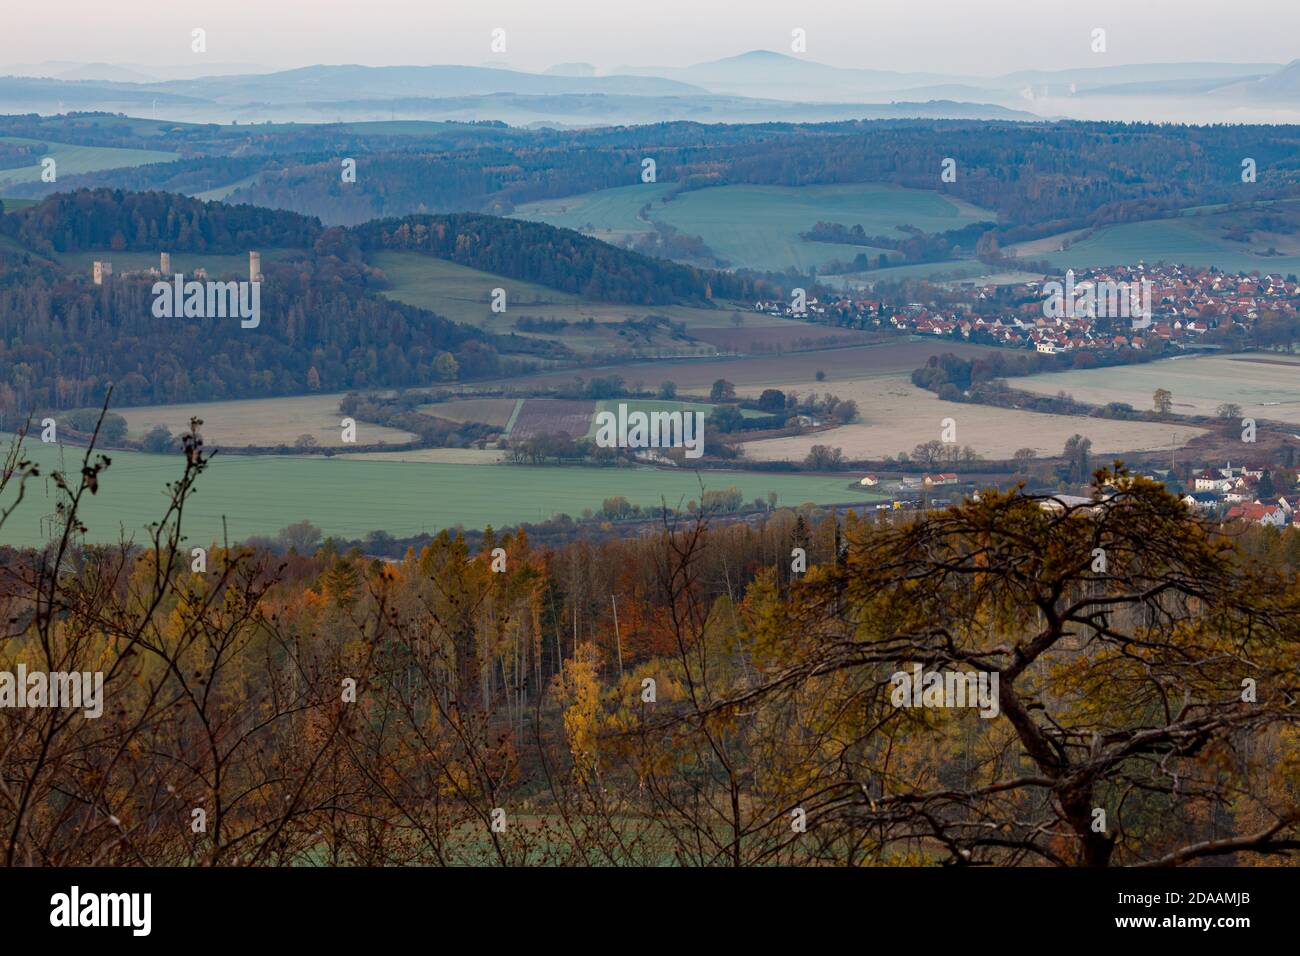 The Landscape of the Werra Valley in Germany Stock Photo